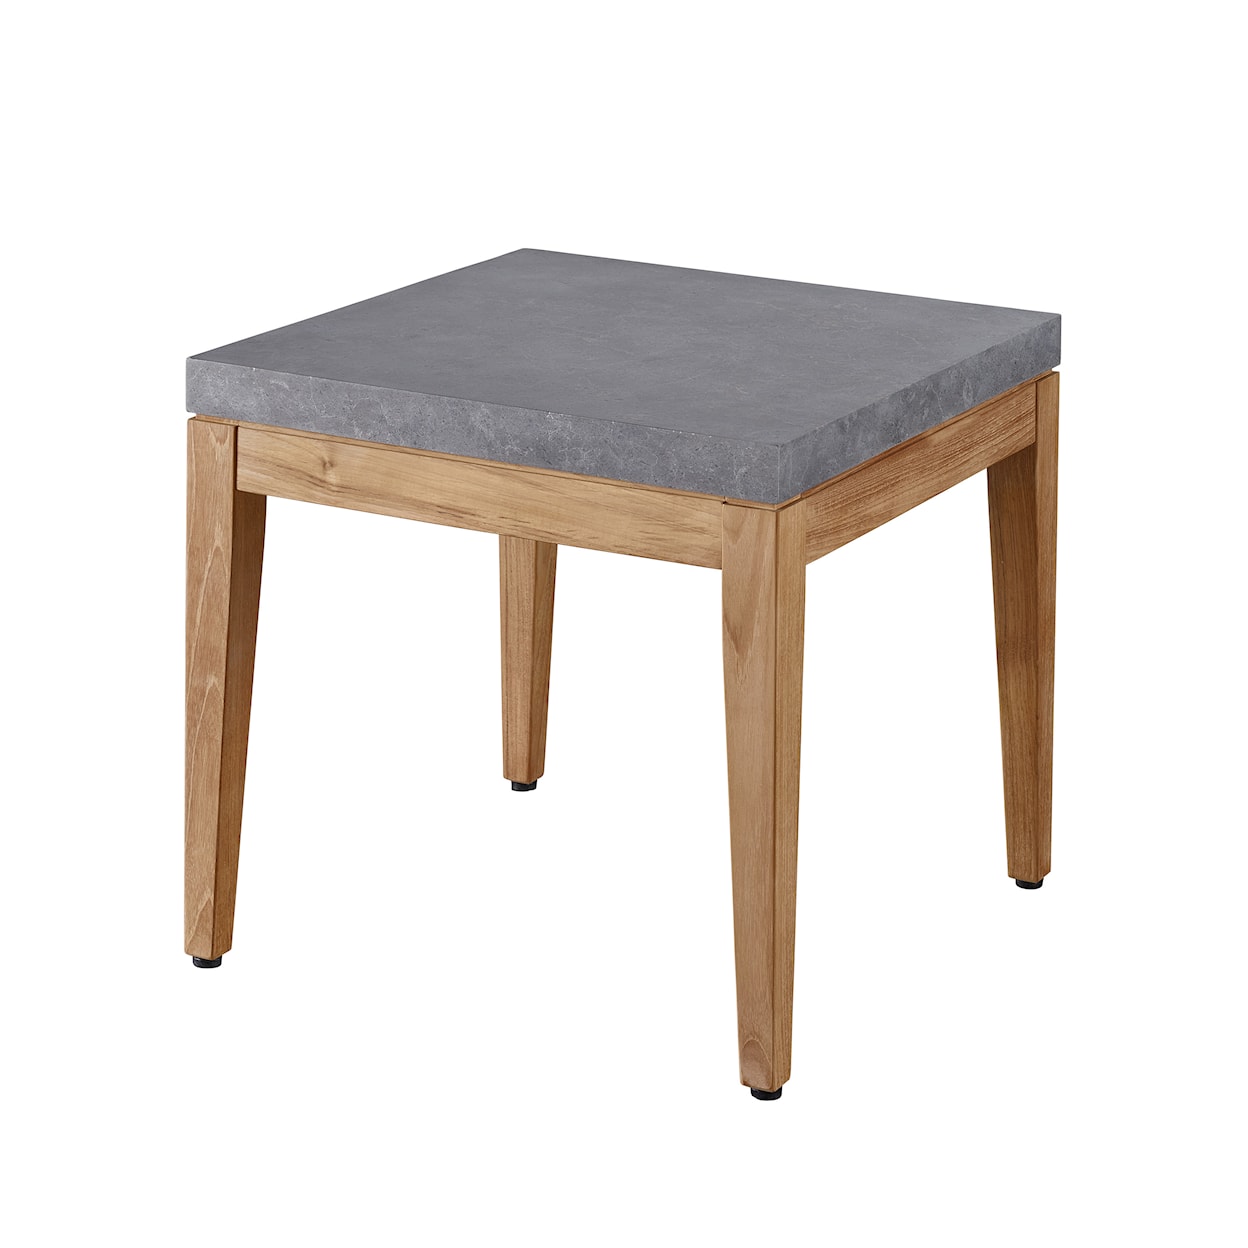 Universal Coastal Living Outdoor Outdoor Chesapeake End Table 